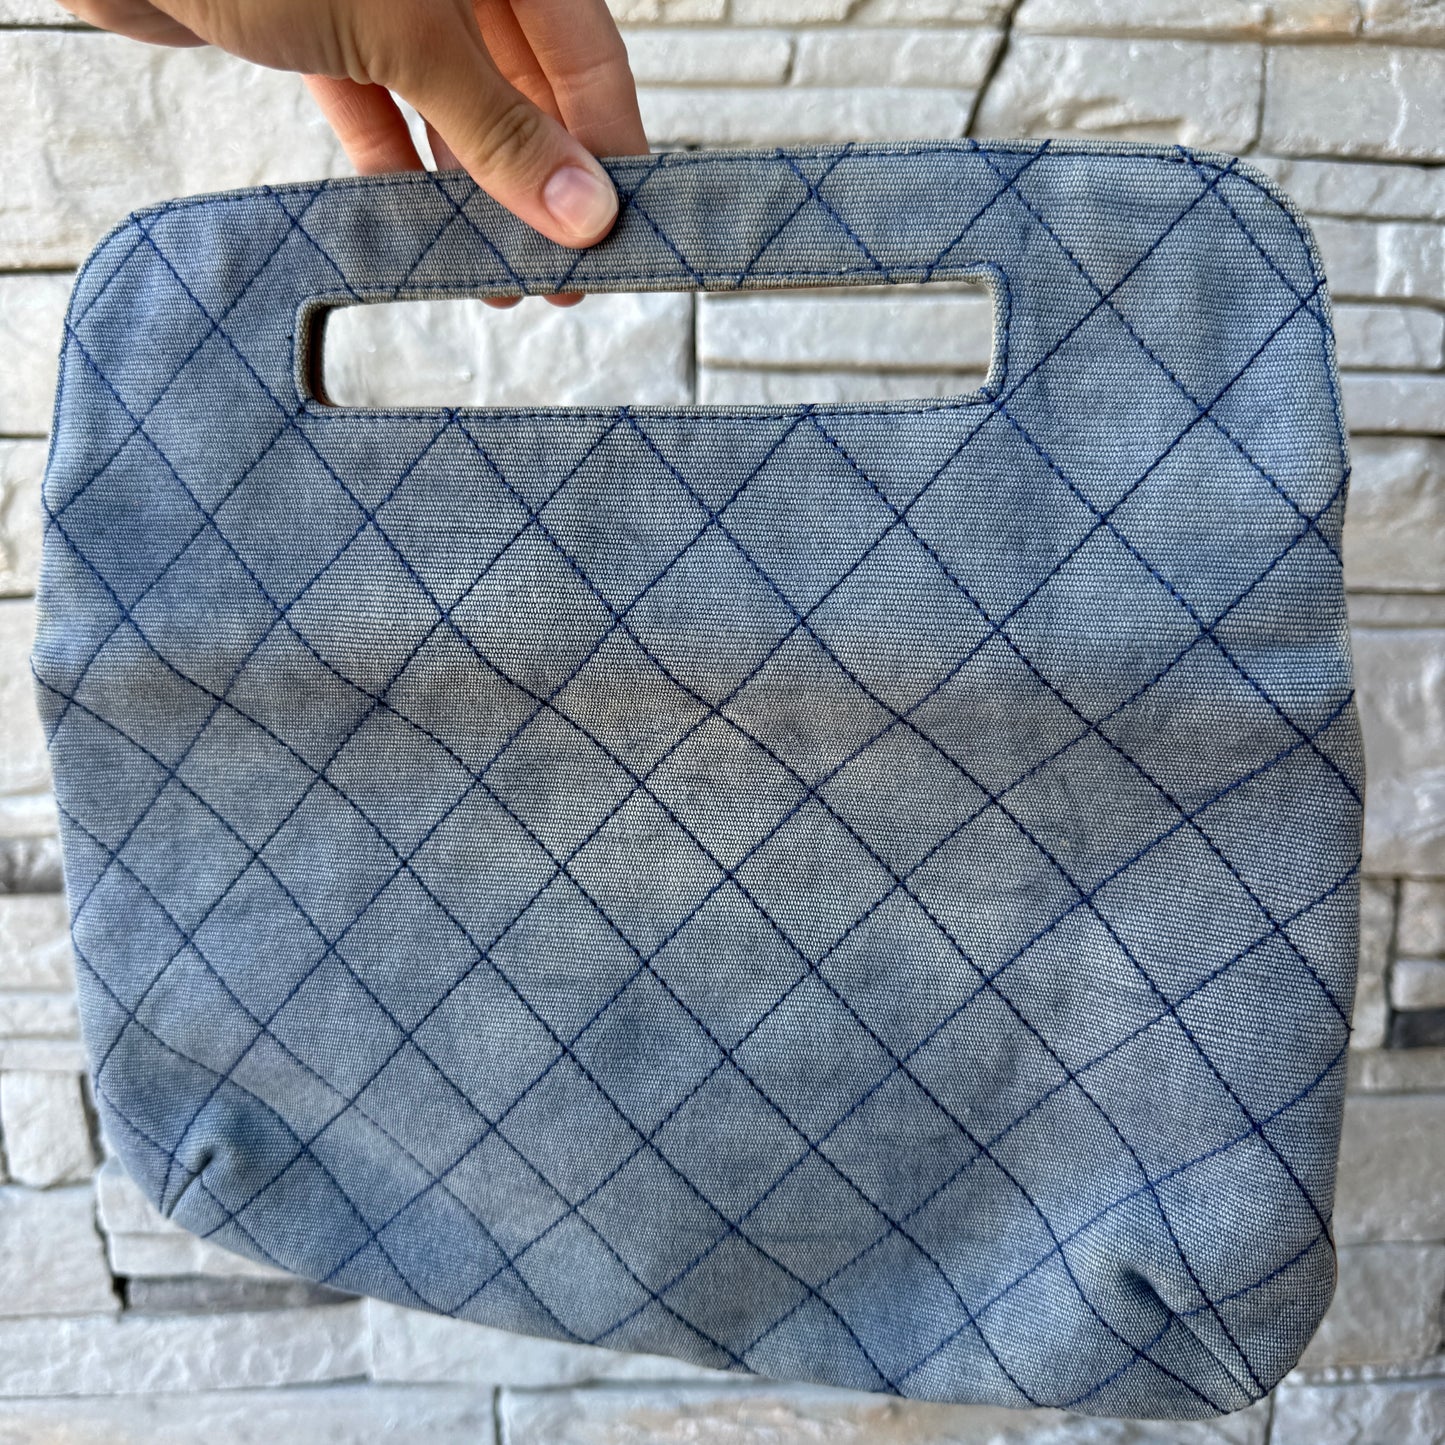 Chanel Denim and Leather 2 Way Clutch